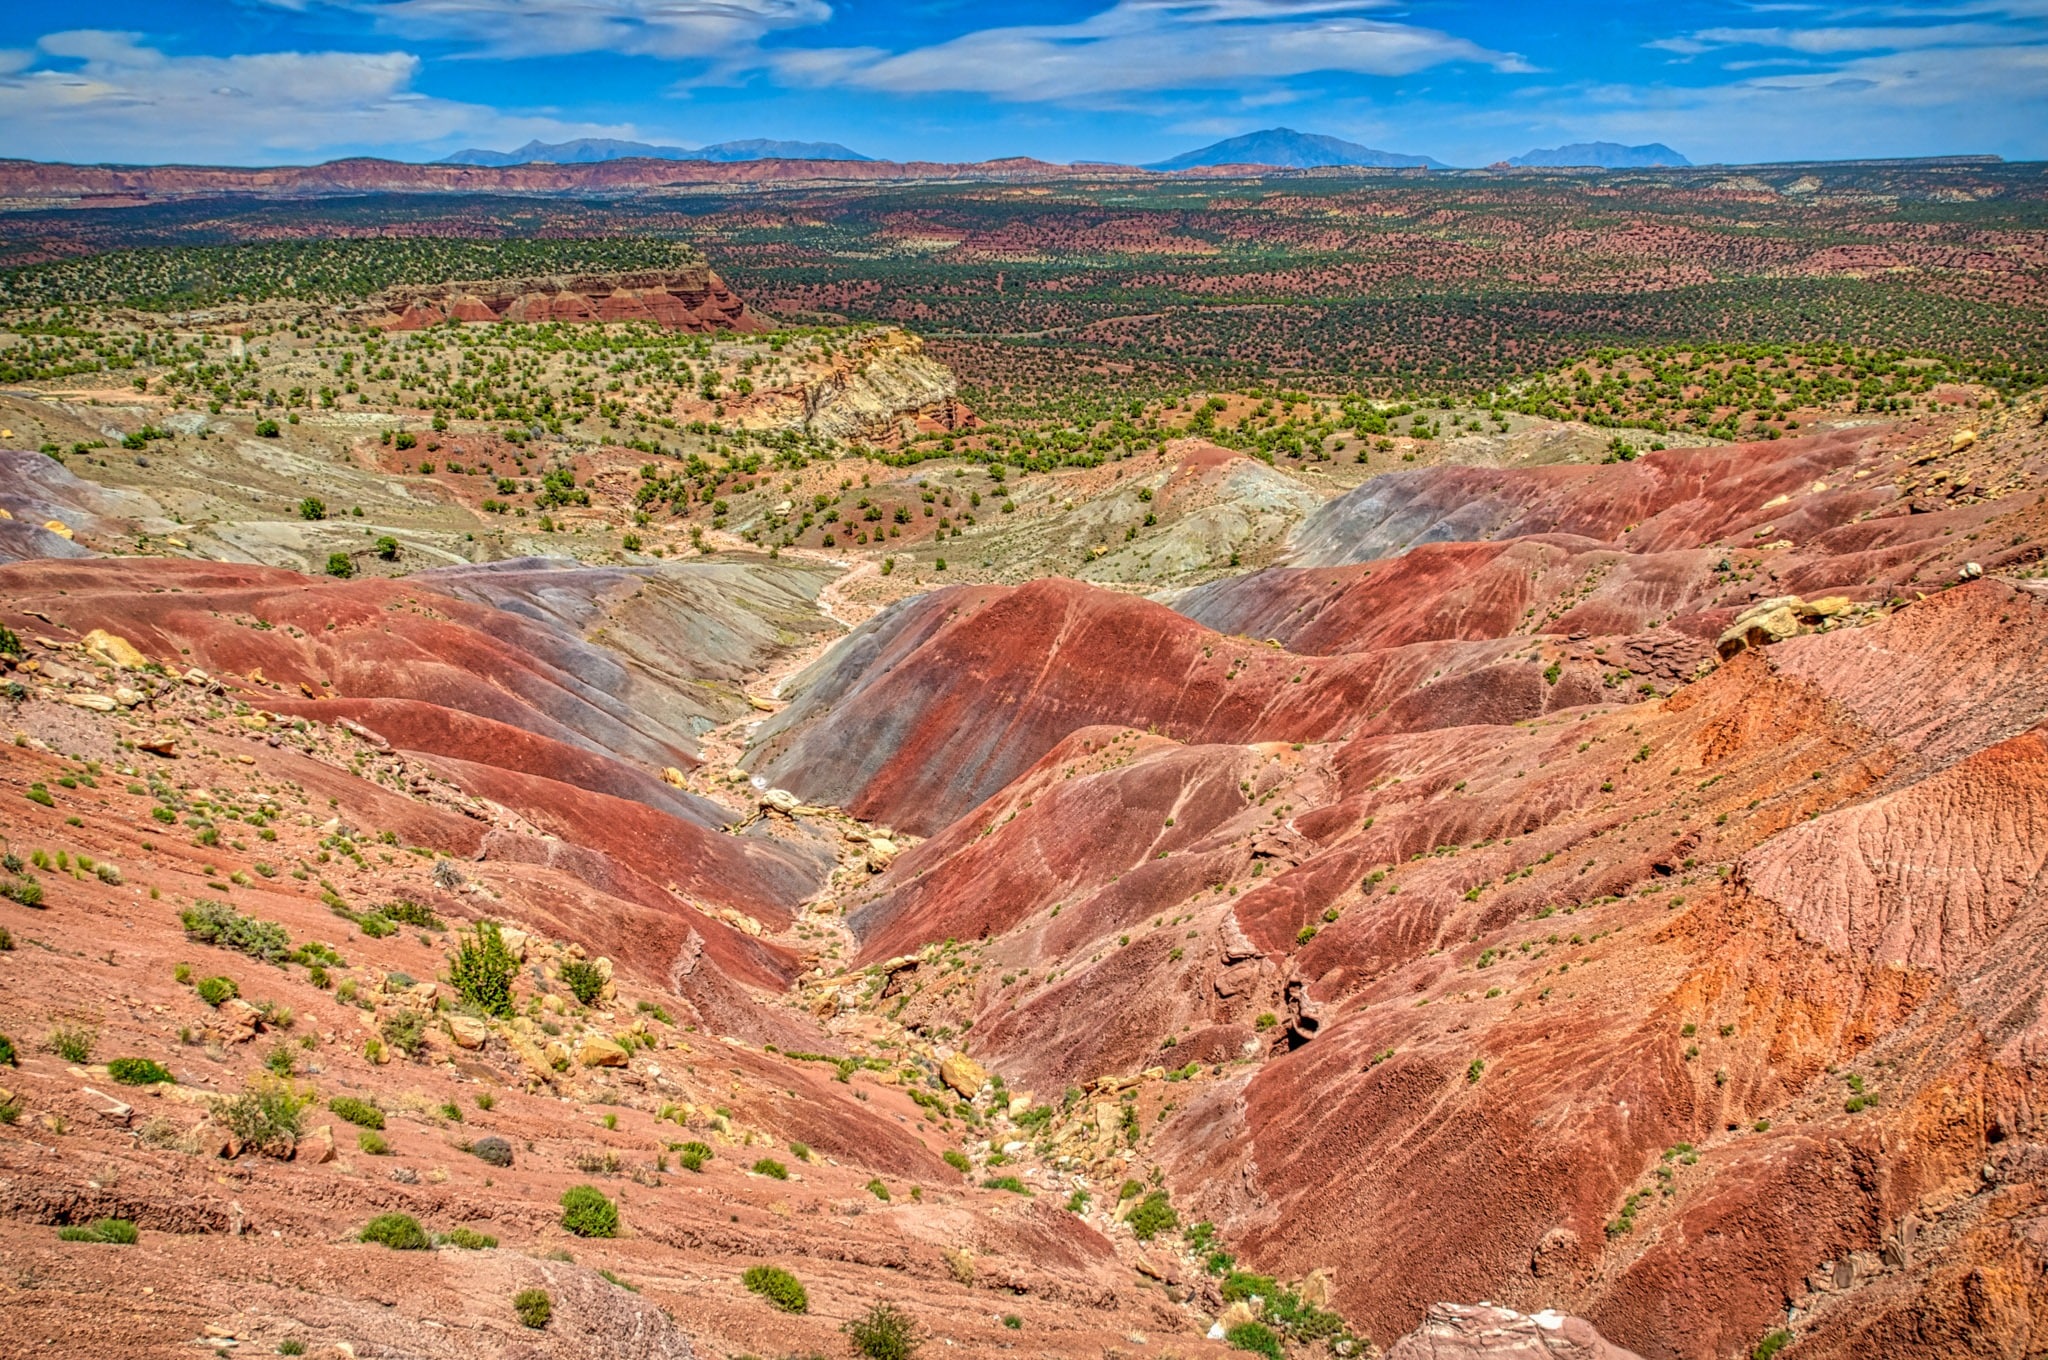 These badlands provide a colorful respite from the steep sandstone canyons farther east near Bullfrog, Utah, close to Capitol Reef National Park.